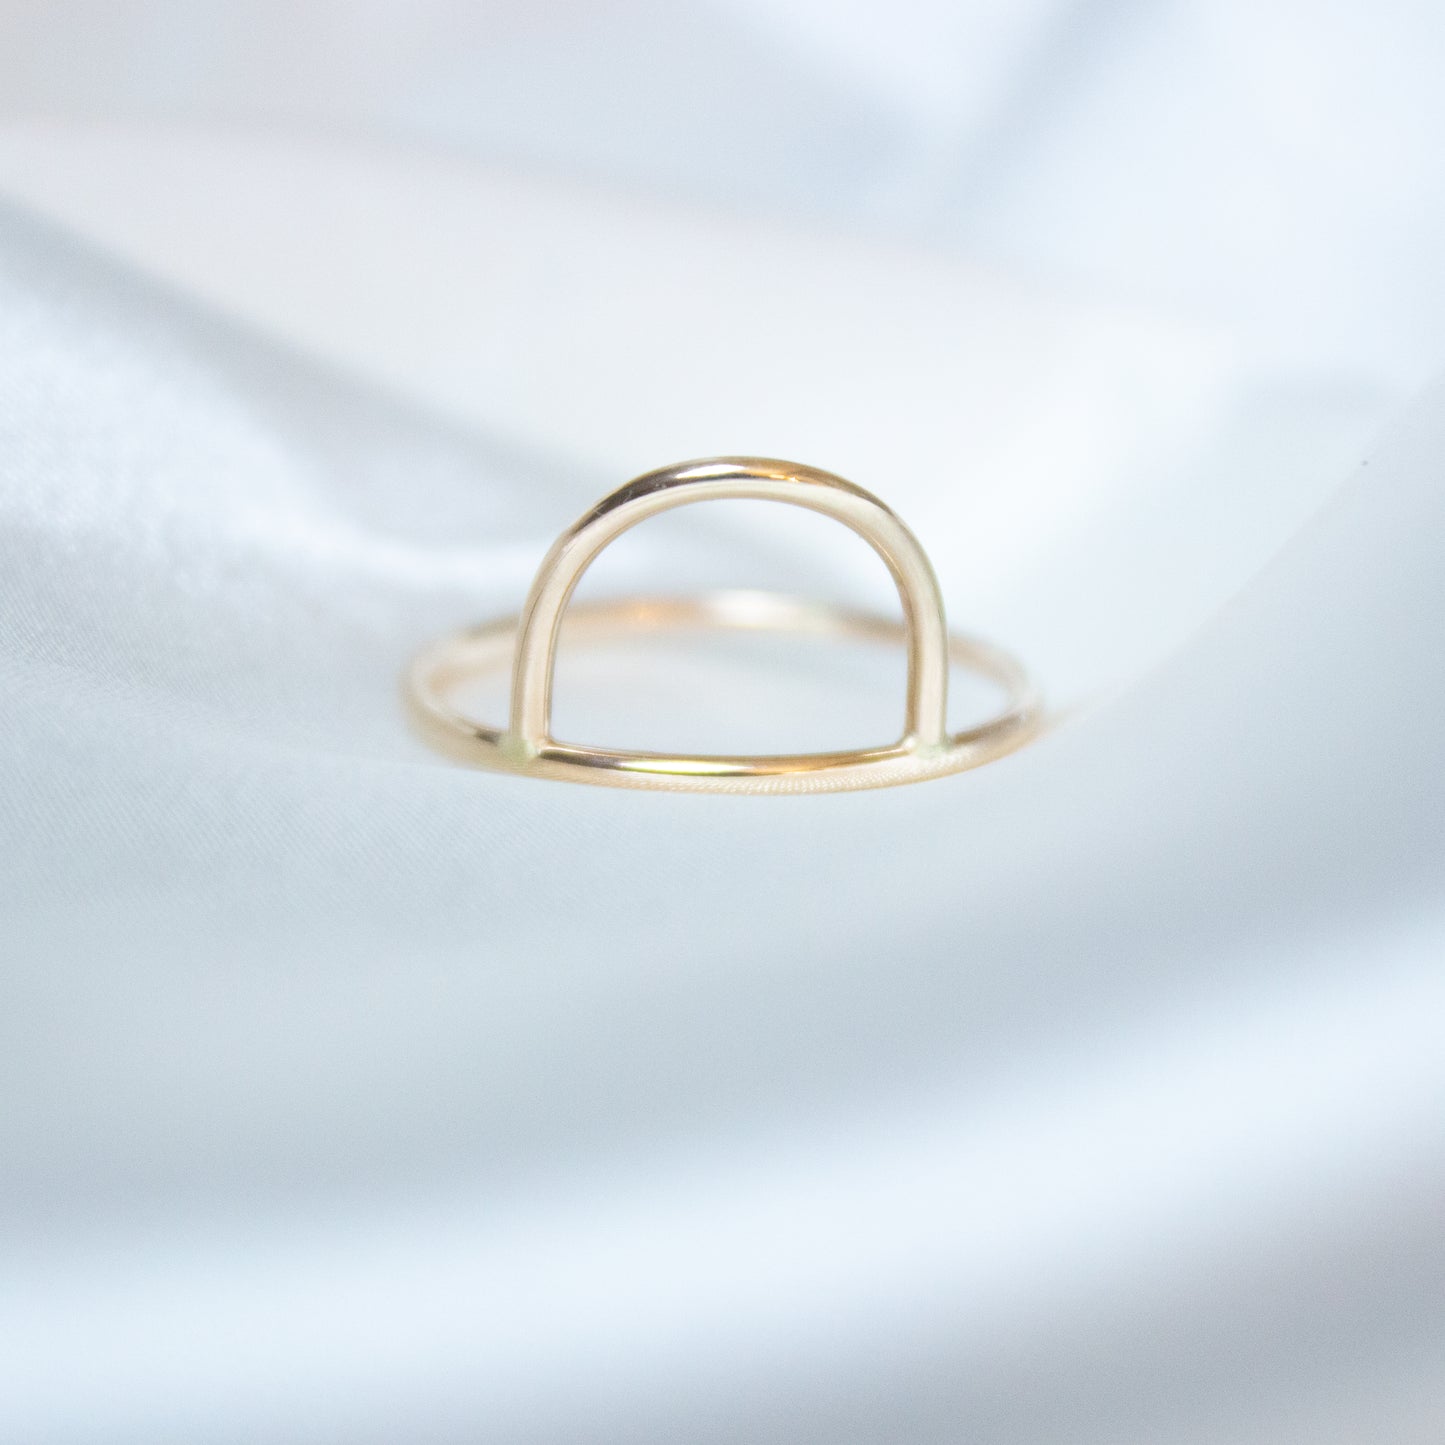 Tall Arch Ring